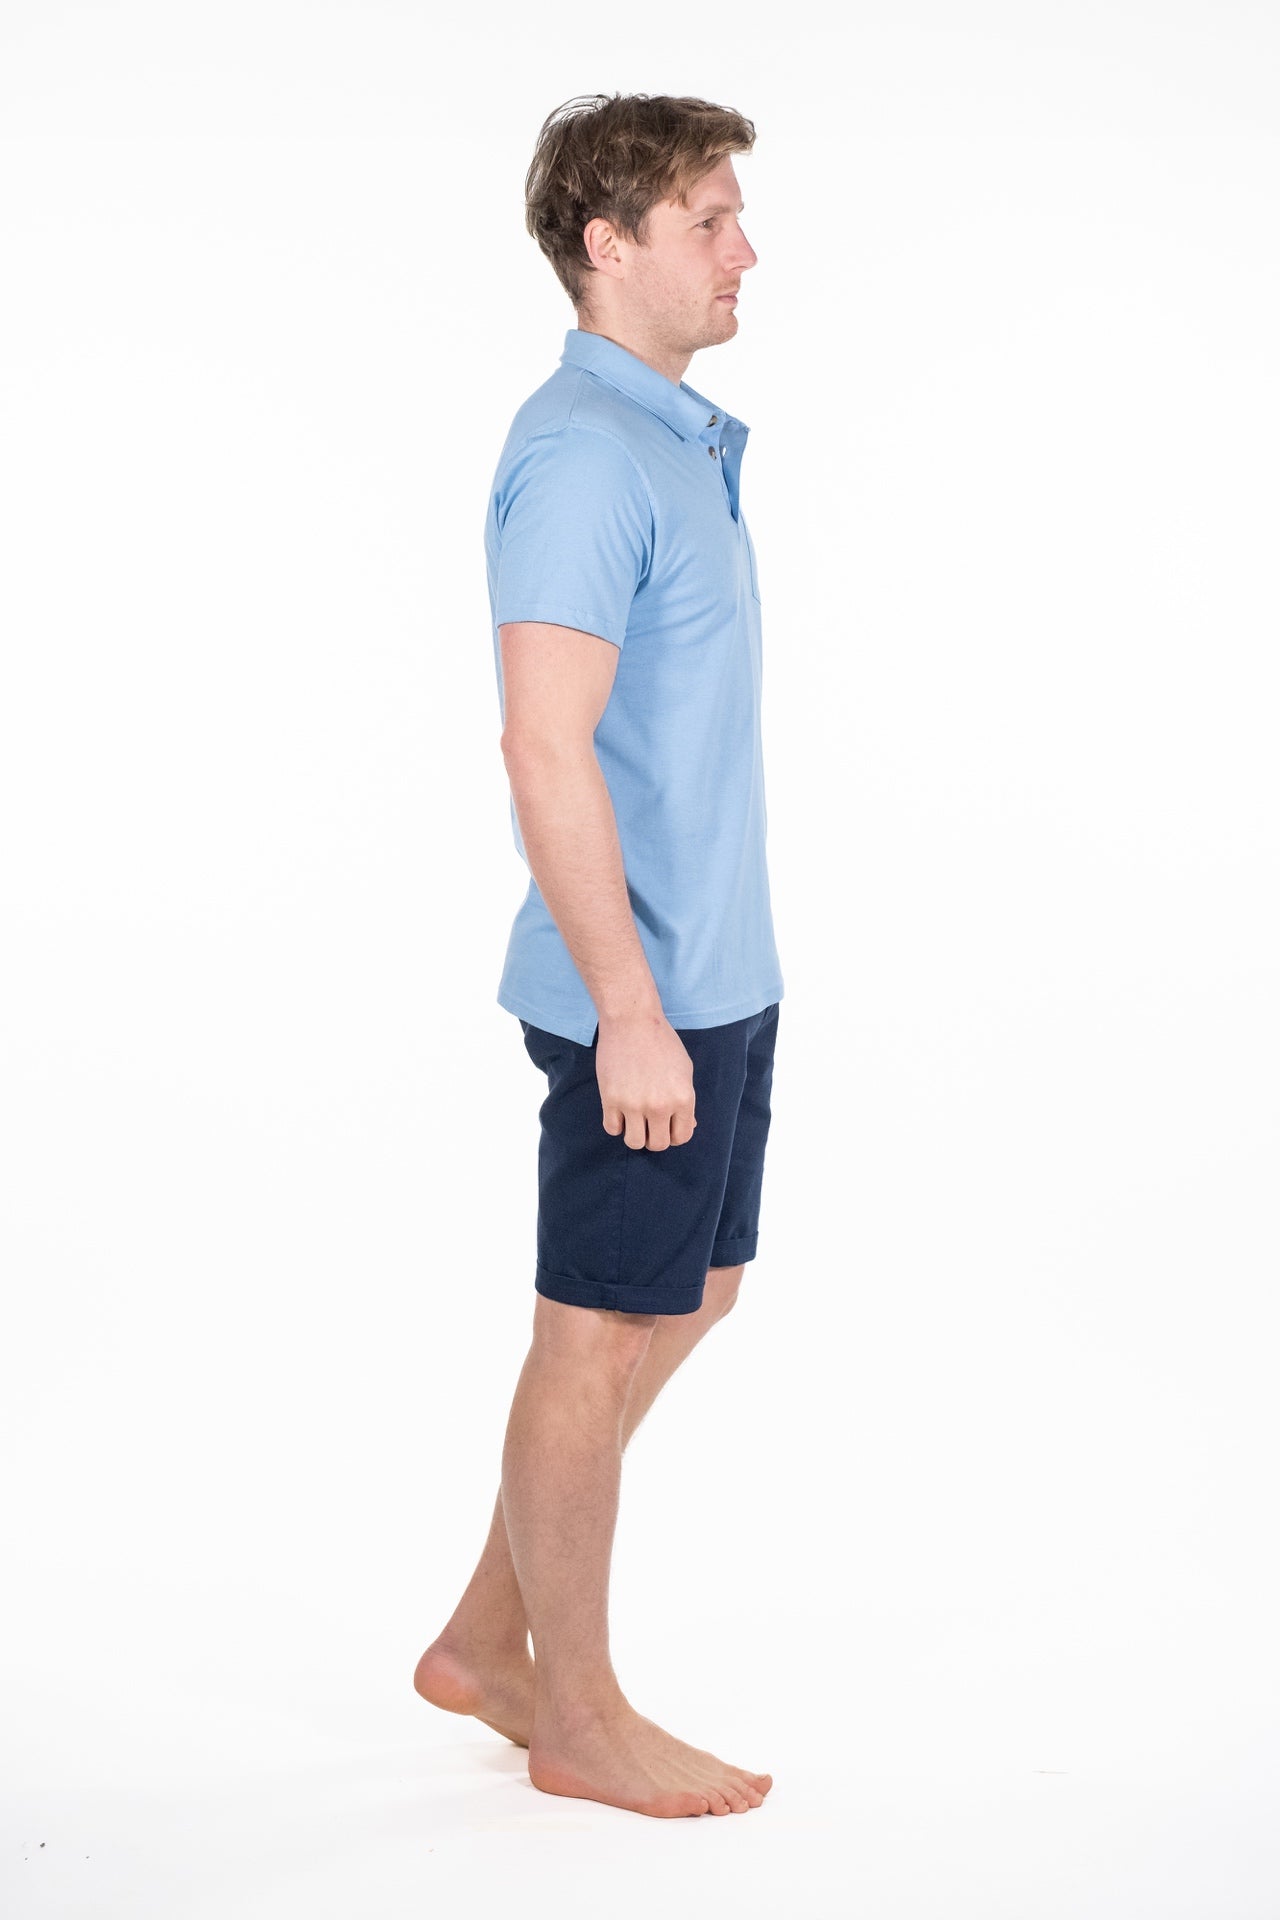 Theo Blue Jersey Polo - Rupert and Buckley - Polo Shirt